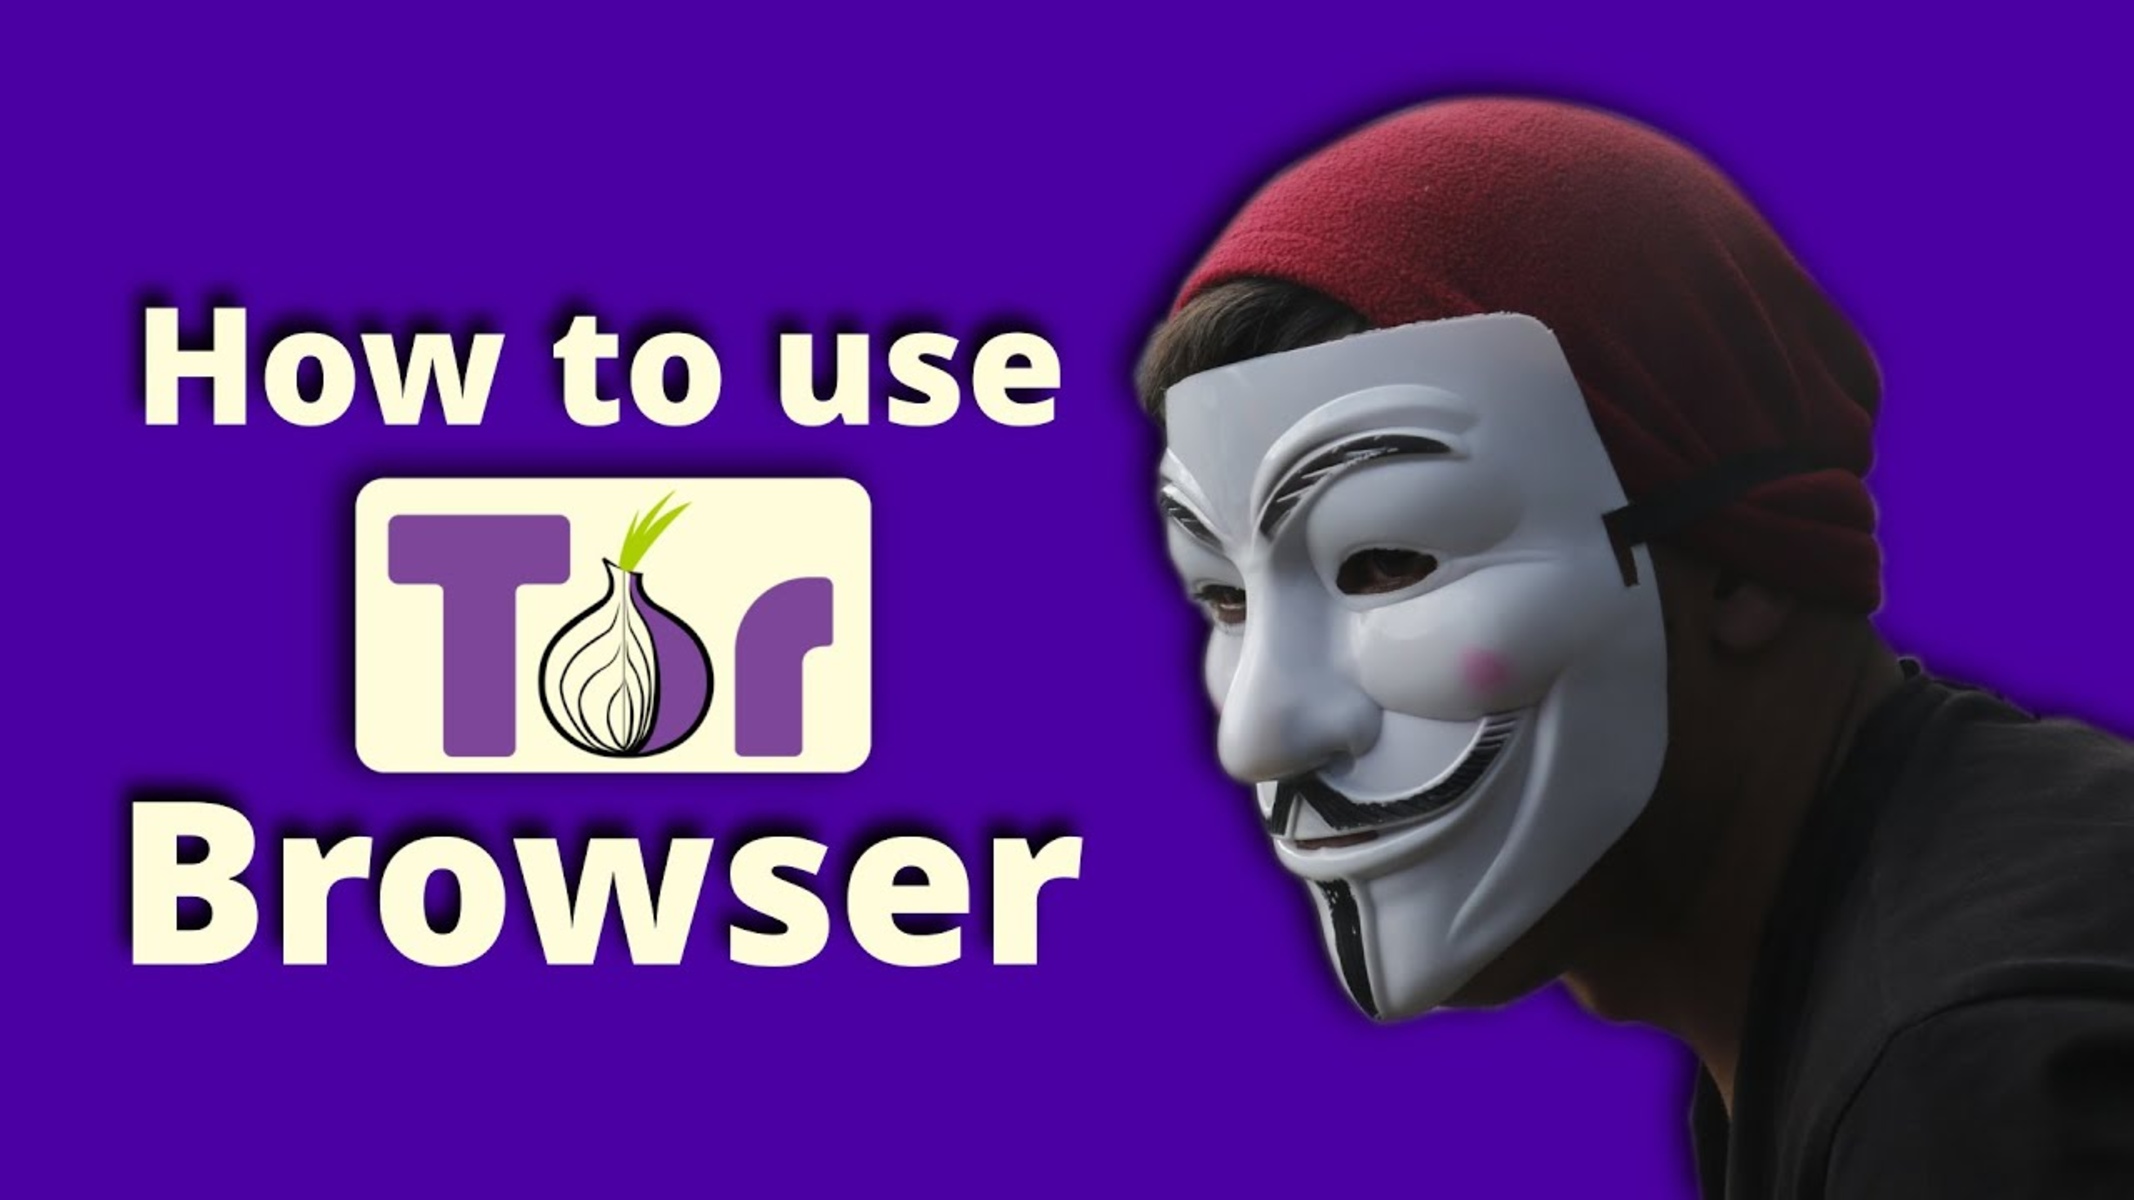 How To Use The TOR Browser